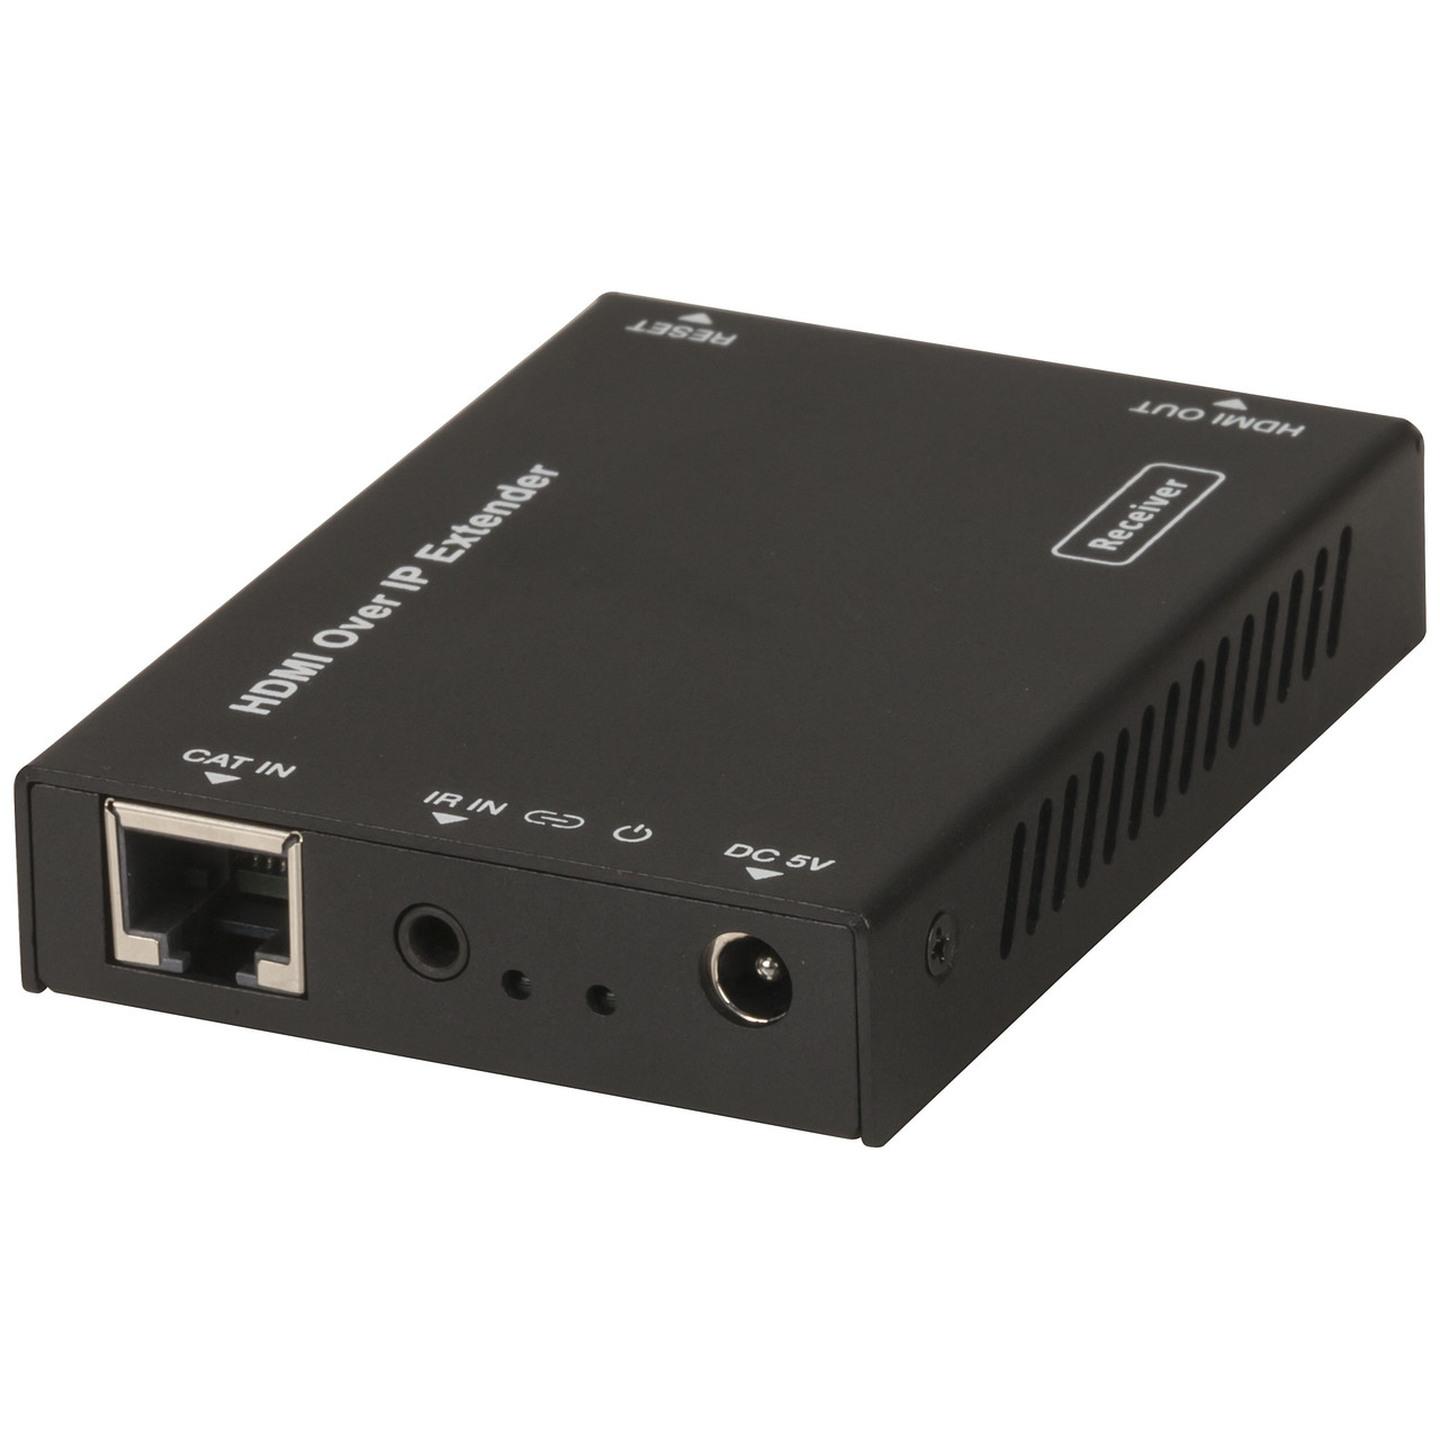 Digitech Spare HDMI Over IP Receiver to suit AC1752